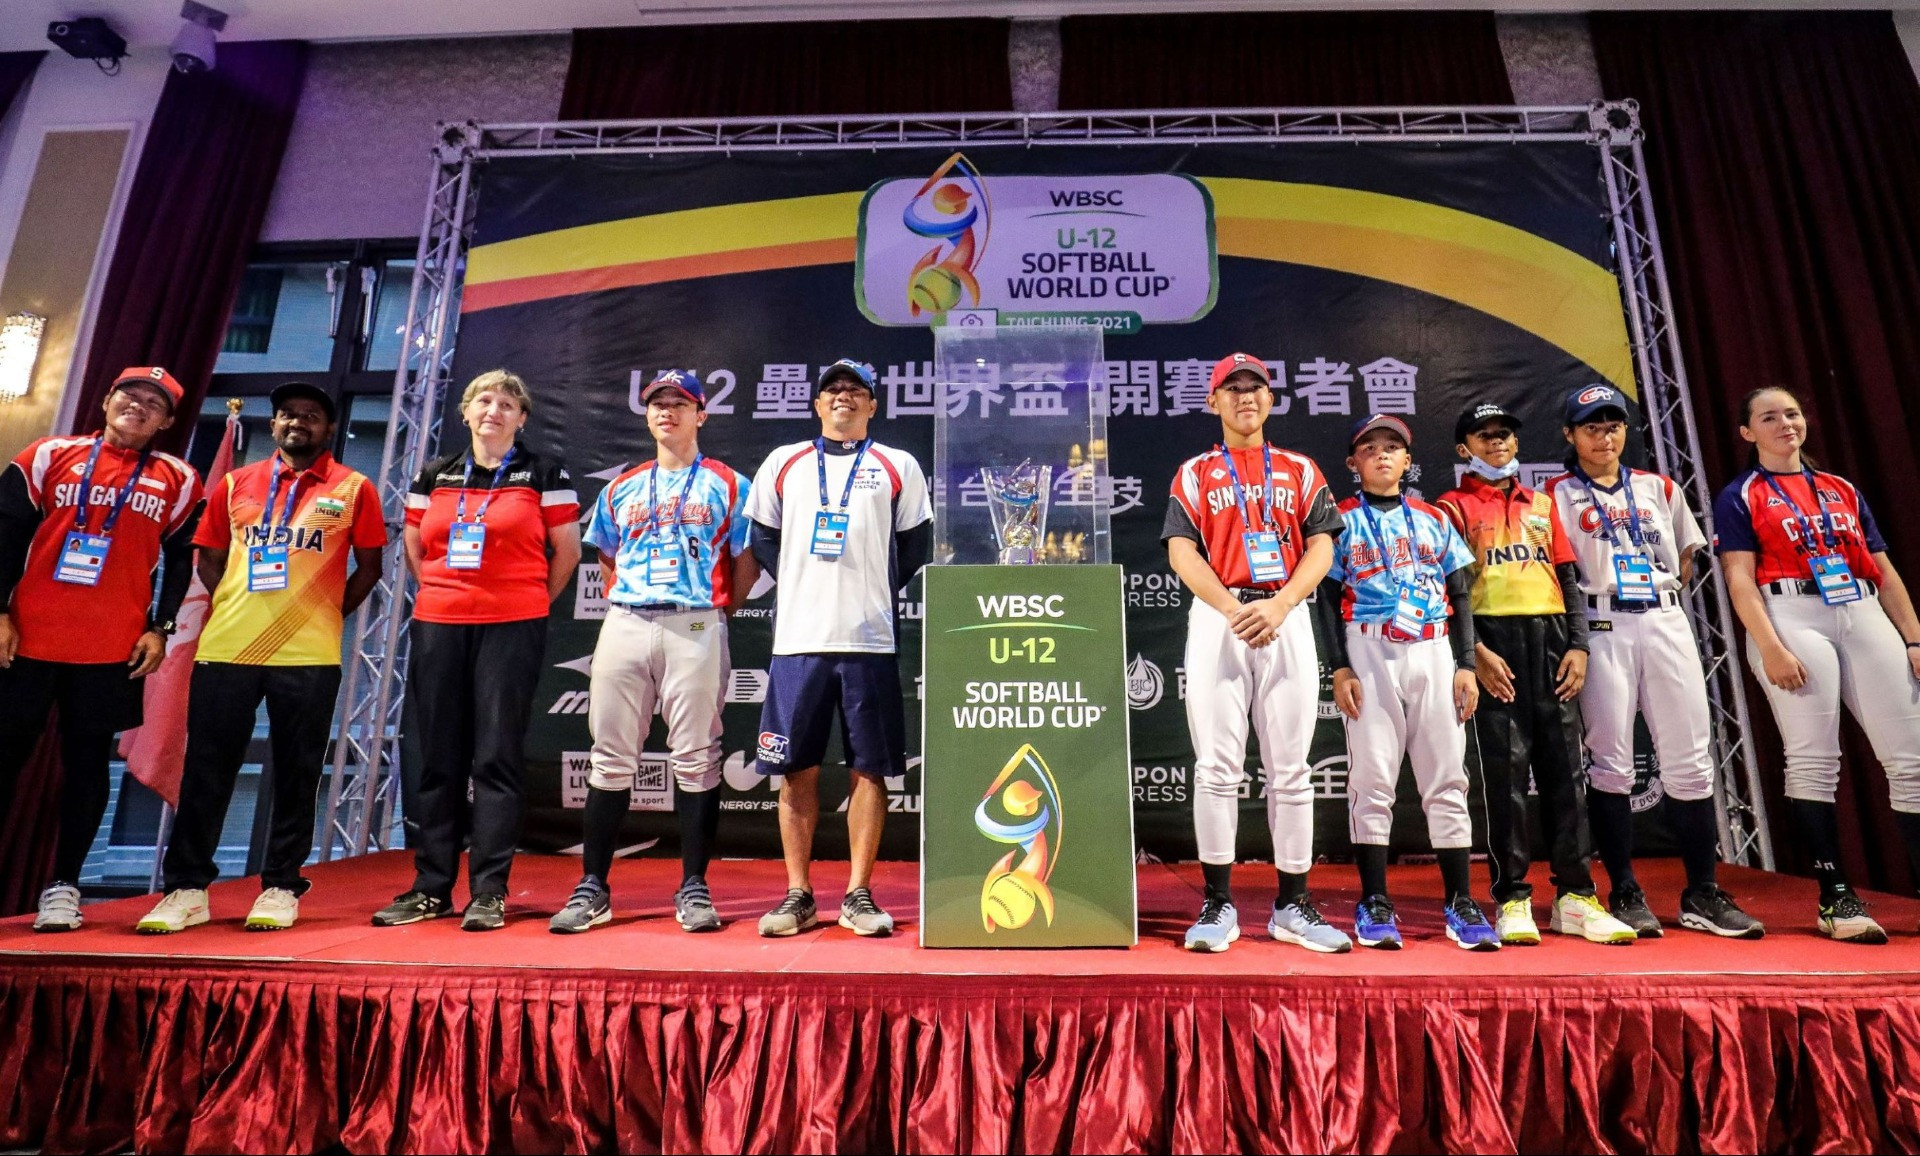 Chinese Taipei are aiming for a second title at the Under-12 Mixed Softball World Cup ©WBSC